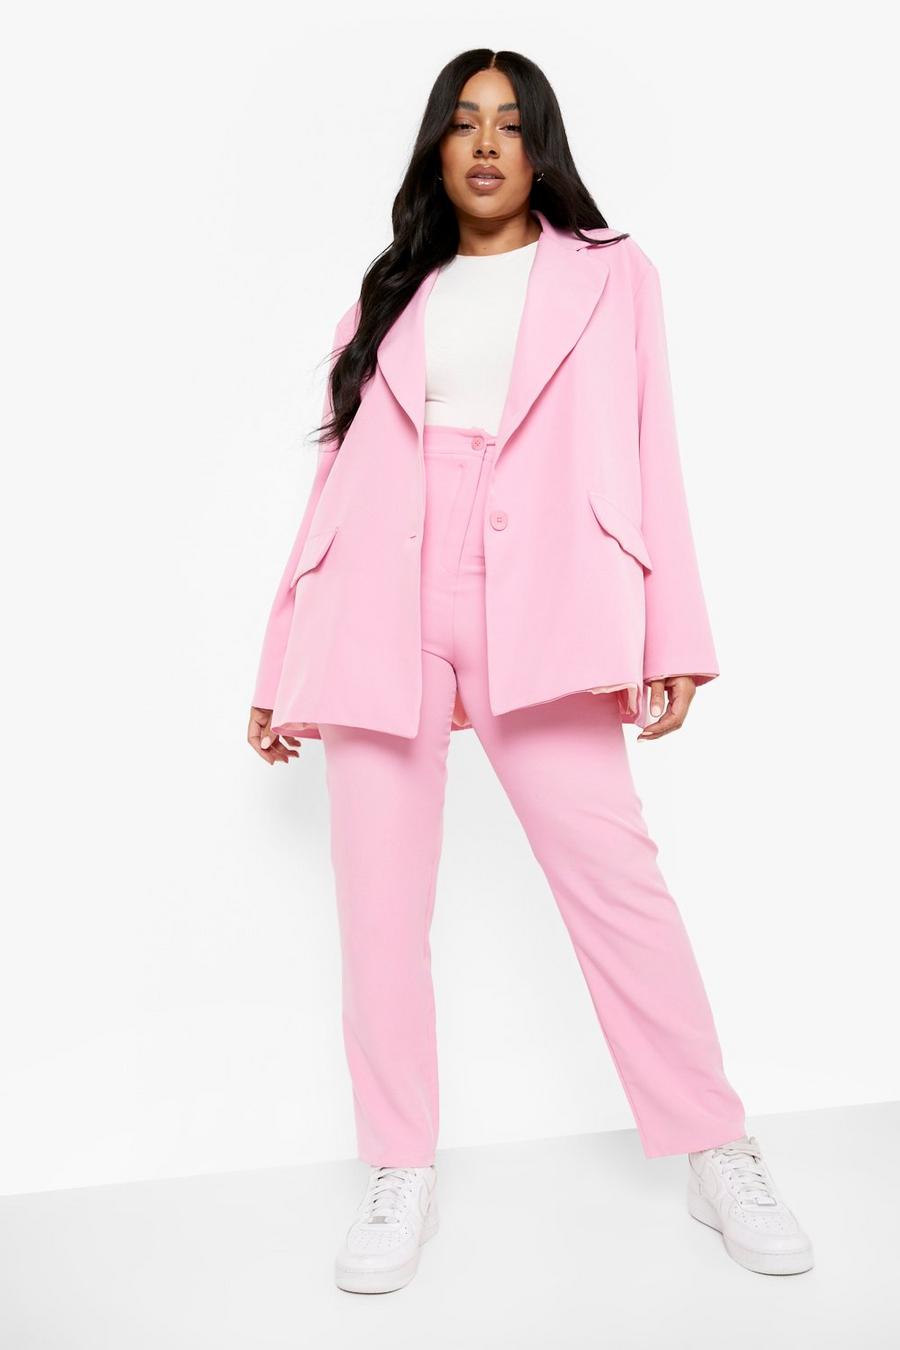 Pink rose Plus Oversized Blazer & Skinny Trouser Suits